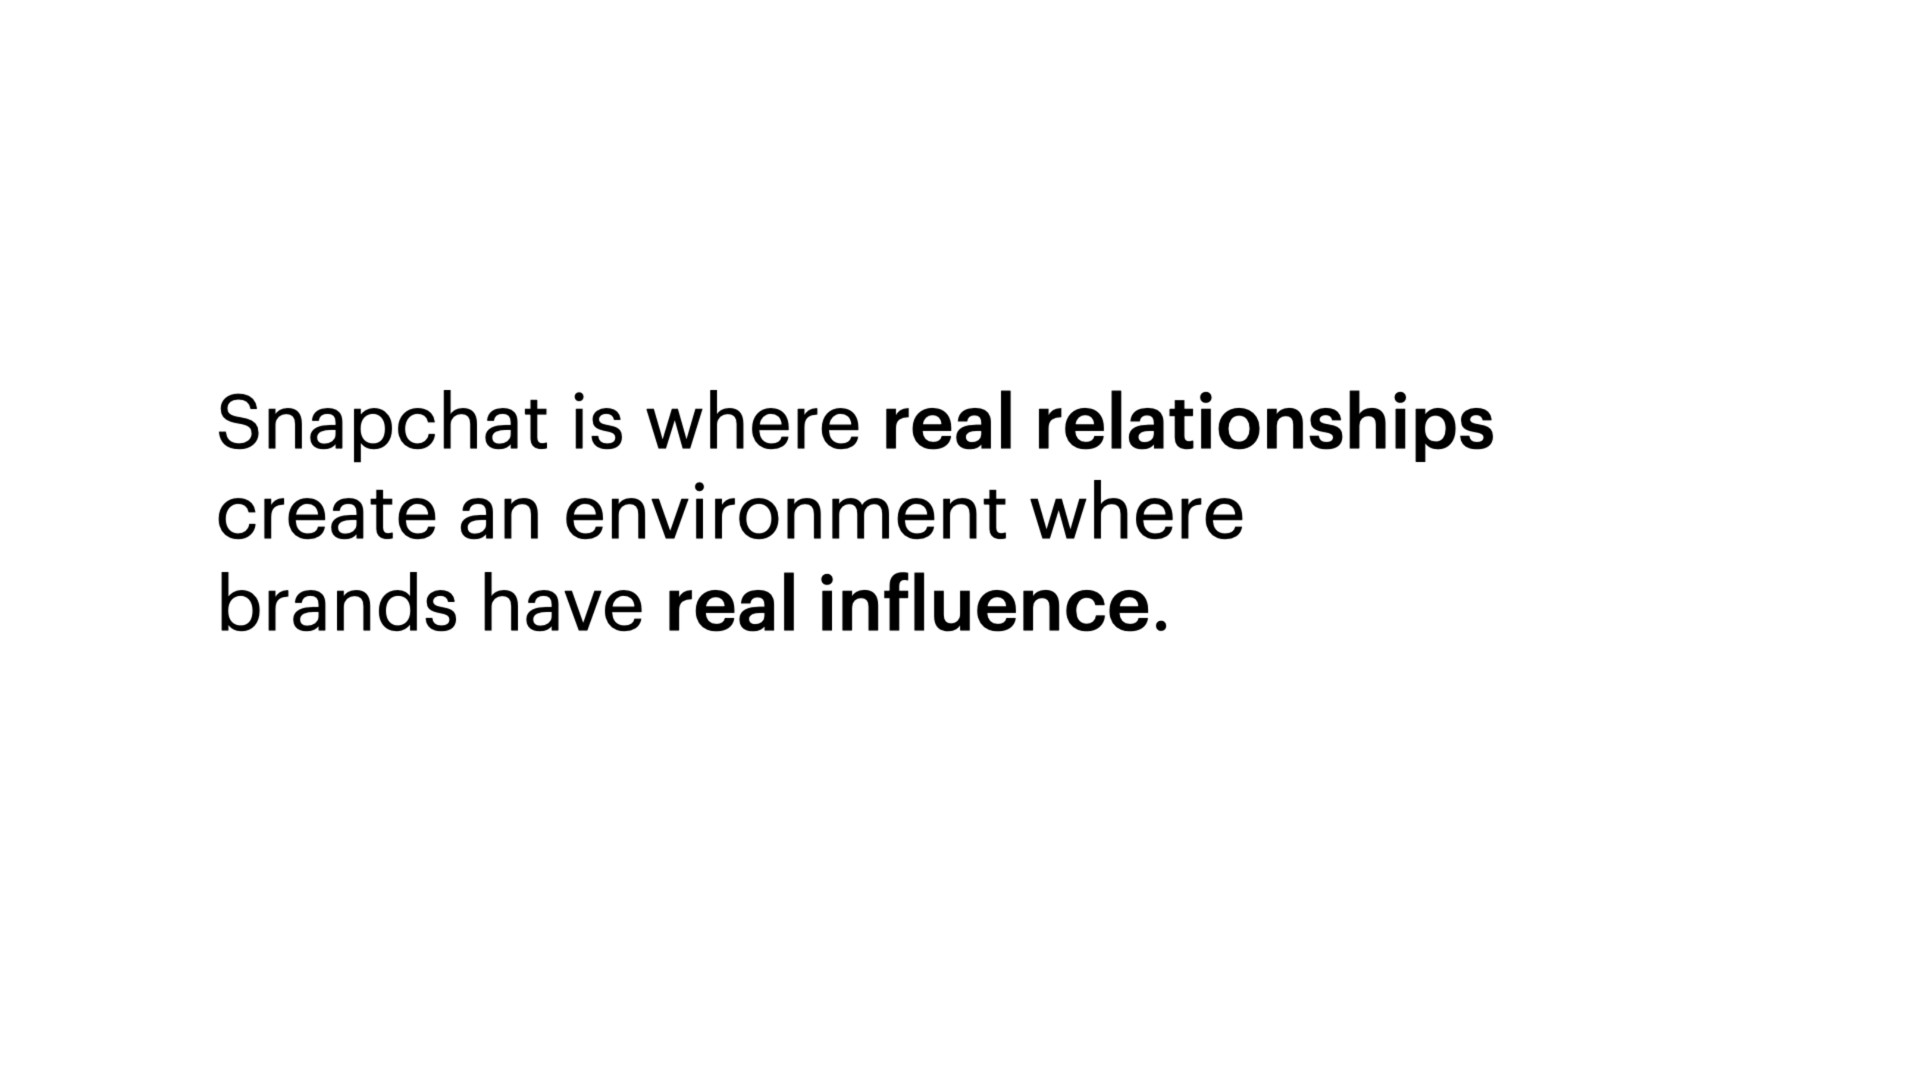 is where real relationships create an environment where brands have real influence | Snap Inc